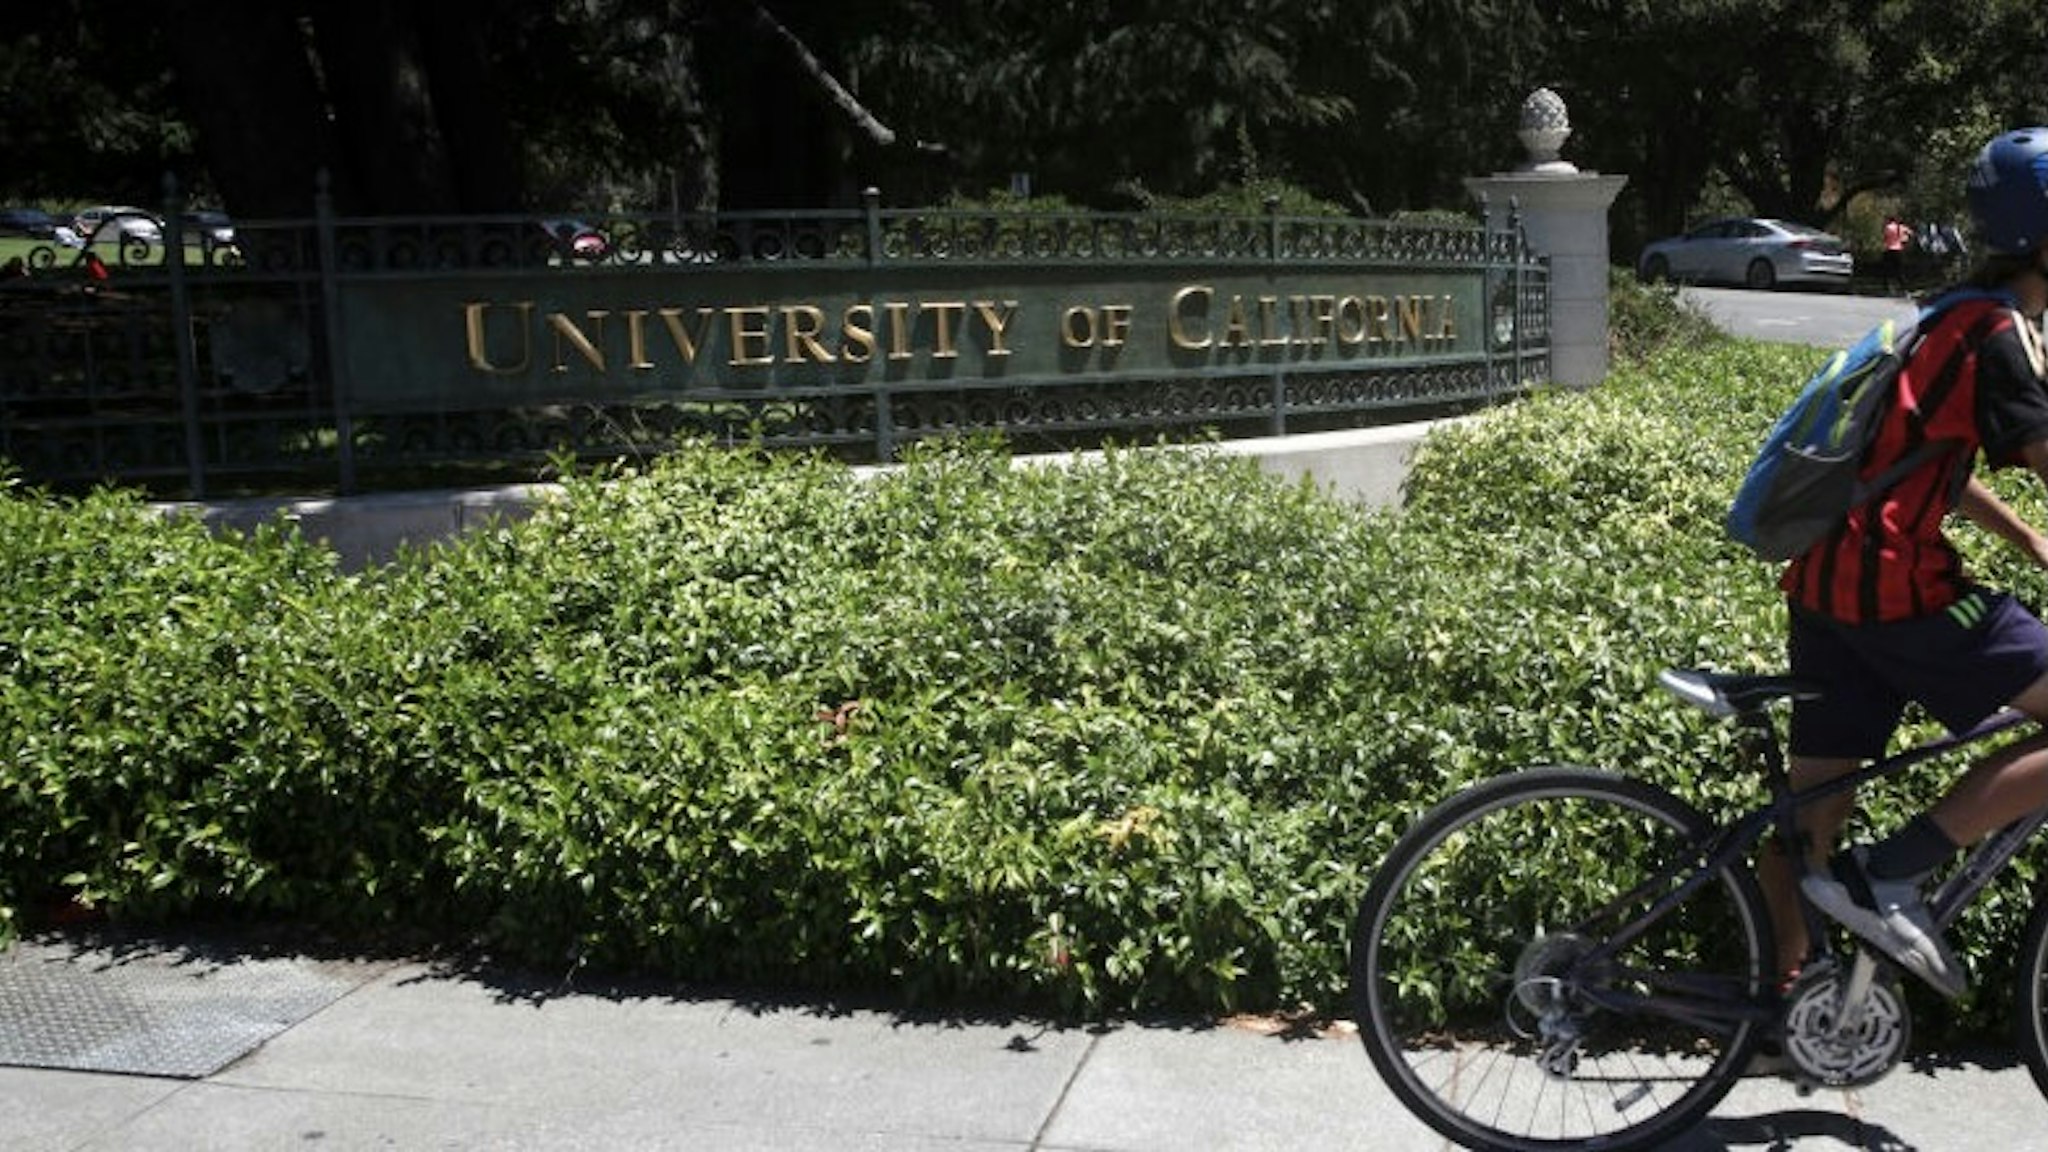 UC Berkeley To Begin Fall Semester With Online-Only Courses BERKELEY, CALIFORNIA - JULY 22: A cyclist rides by a sign in front of the U.C. Berkeley campus on July 22, 2020 in Berkeley, California. U.C. Berkeley announced plans on Tuesday to move to online education for the start of the school's fall semester due to the coronavirus COVID-19 pandemic. (Photo by Justin Sullivan/Getty Images) Justin Sullivan / Staff Photo by Justin Sullivan/Staff/Getty Images via Getty Images